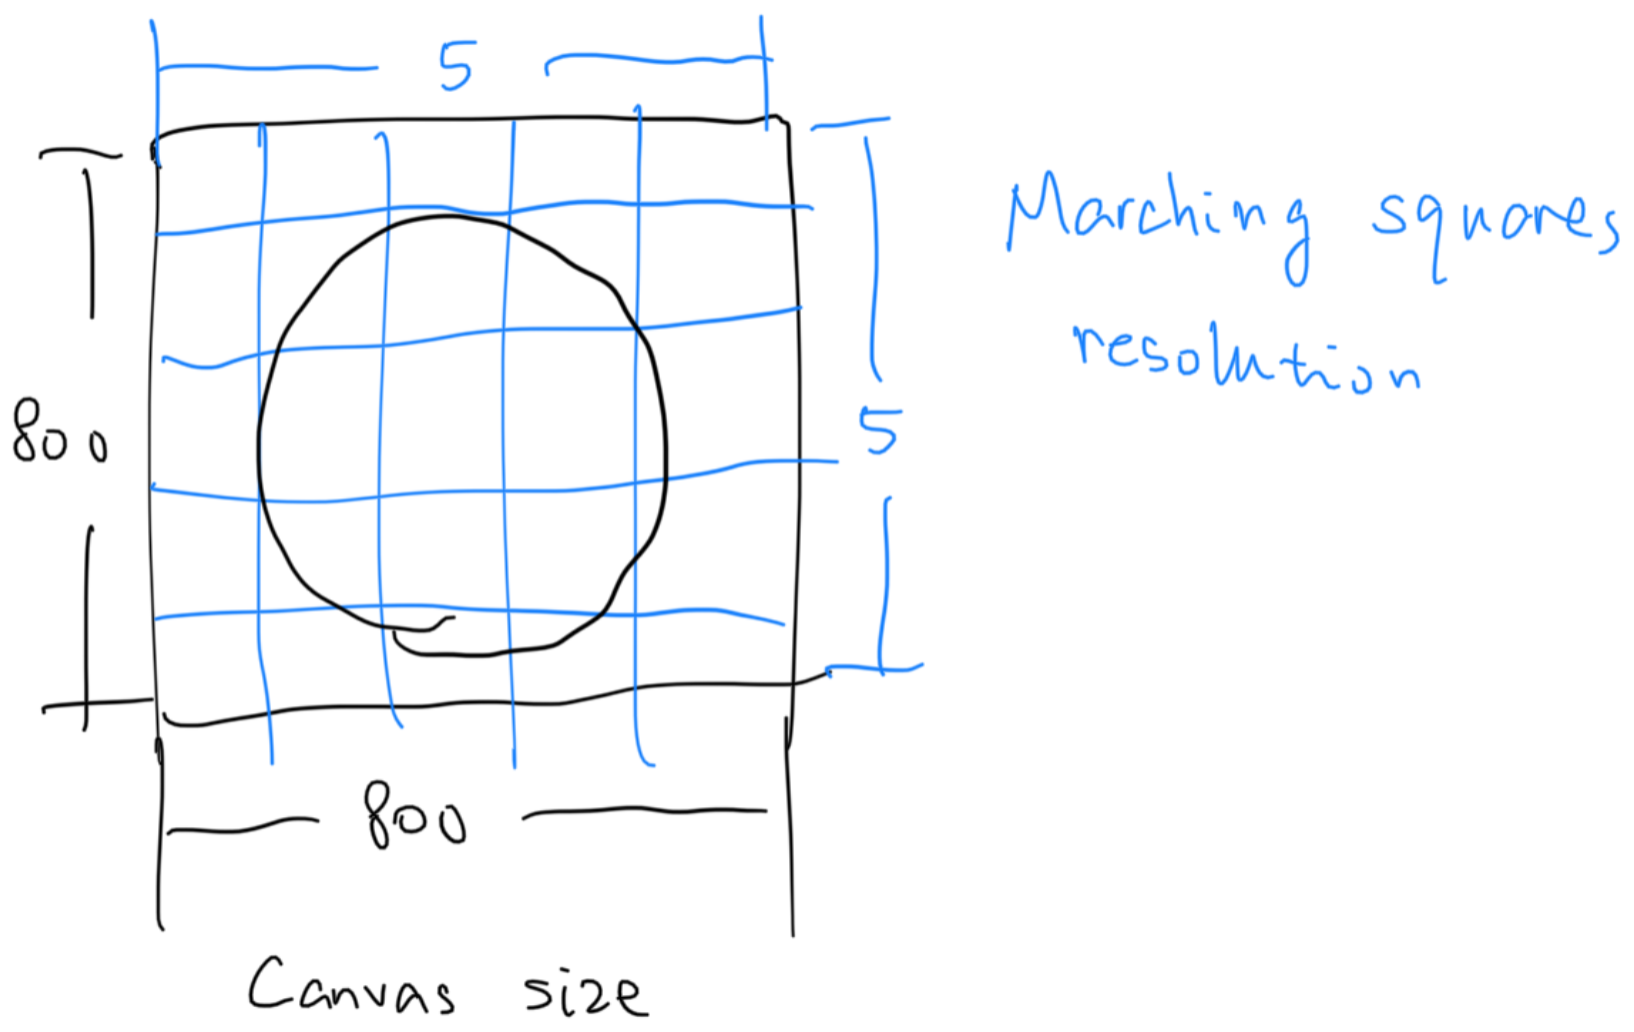 The marching squares resolution.